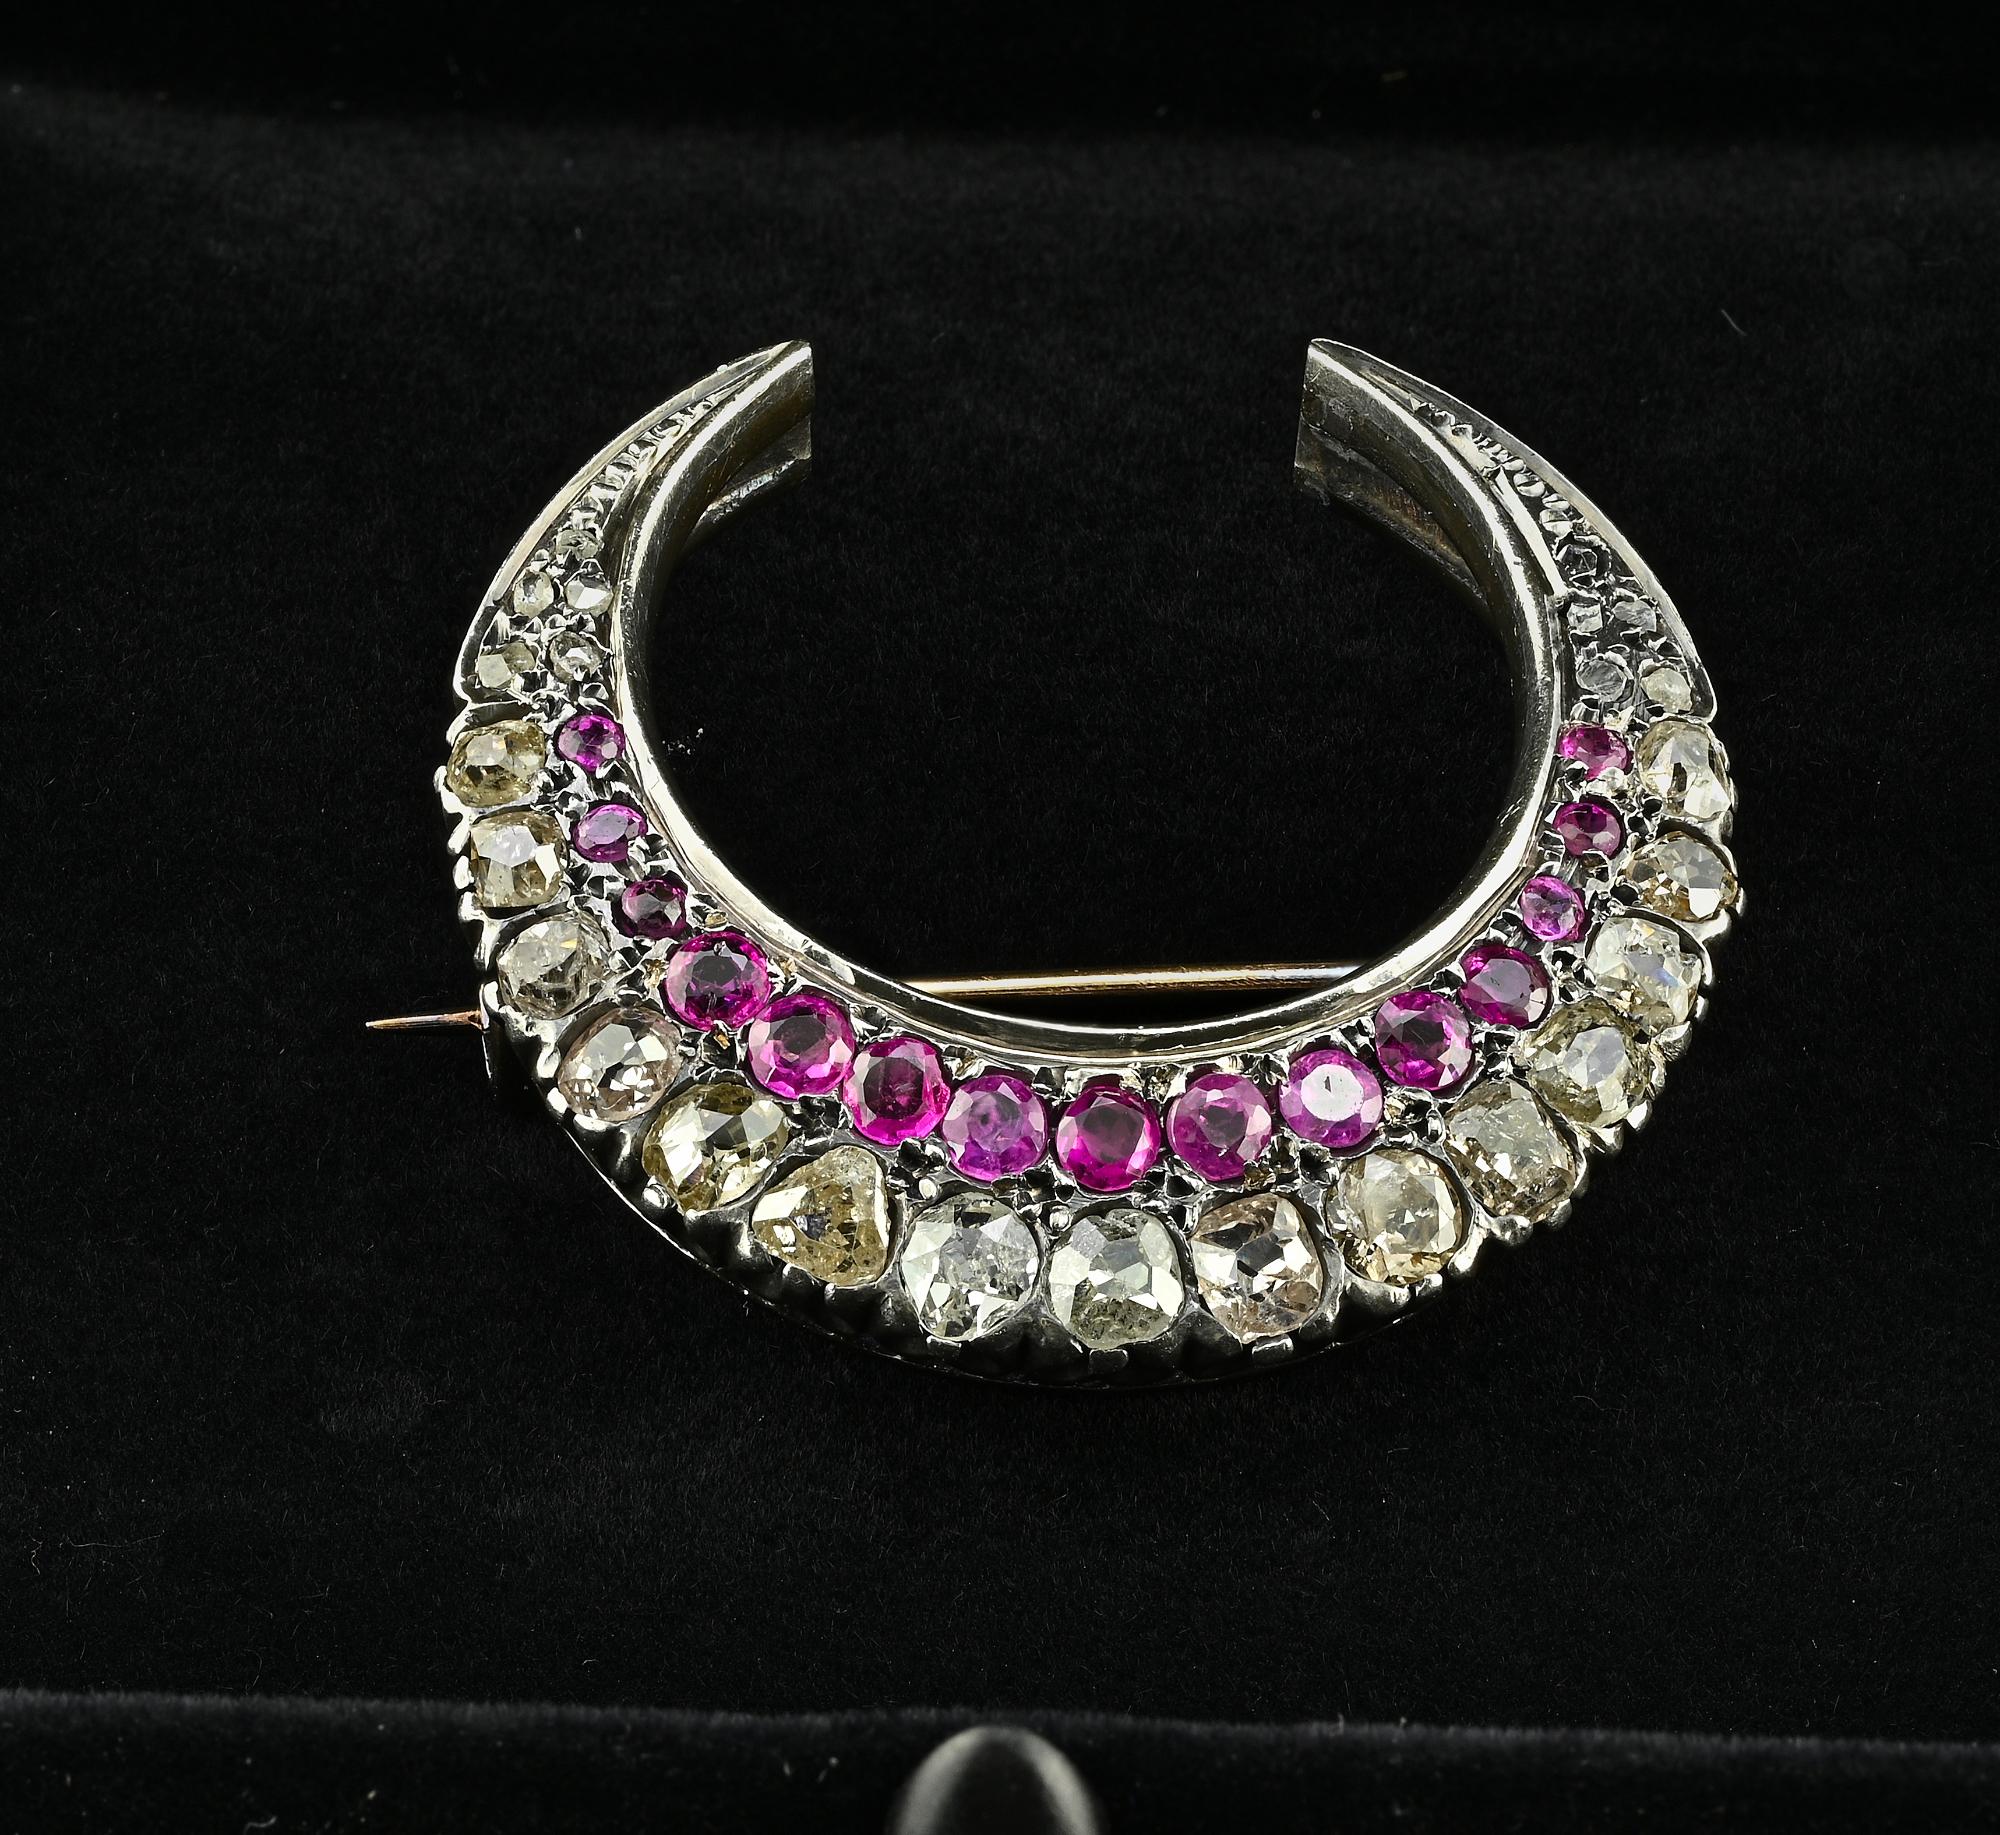 This beautiful antique Crescent Moon is 1870 ca
Glorious Victorian workmanship made of solid 18 KT gold and Silver
Set with 15 graduated in size old mine cut Diamonds and tiny rose cut Diamonds to complement, approx 3.10 Ct (H/I-SI/I) – lovely color